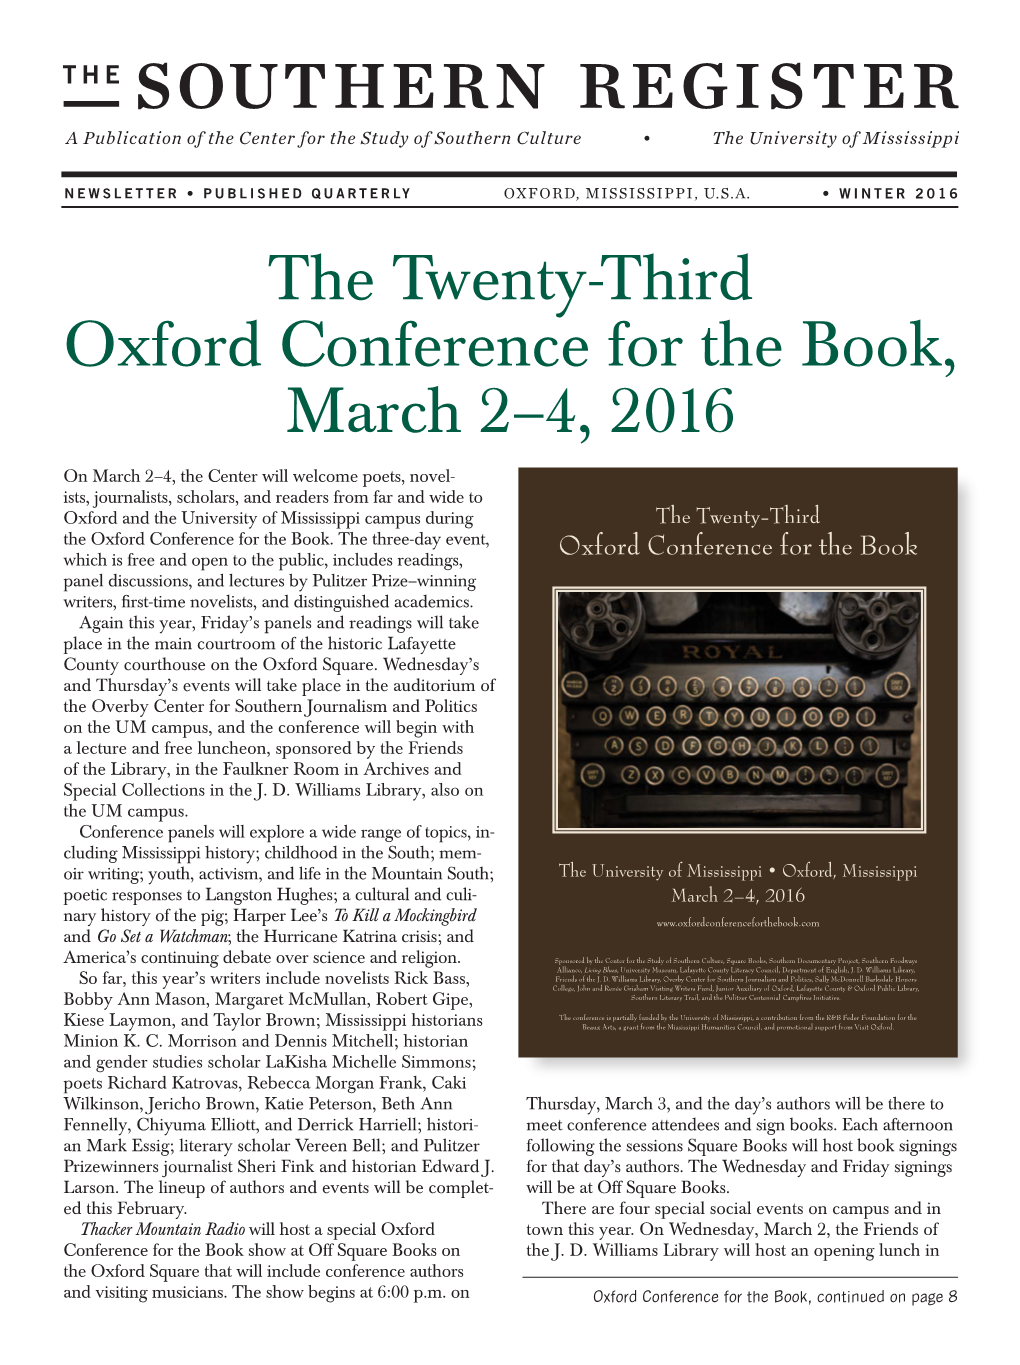 The Twenty-Third Oxford Conference for the Book, March 2–4, 2016